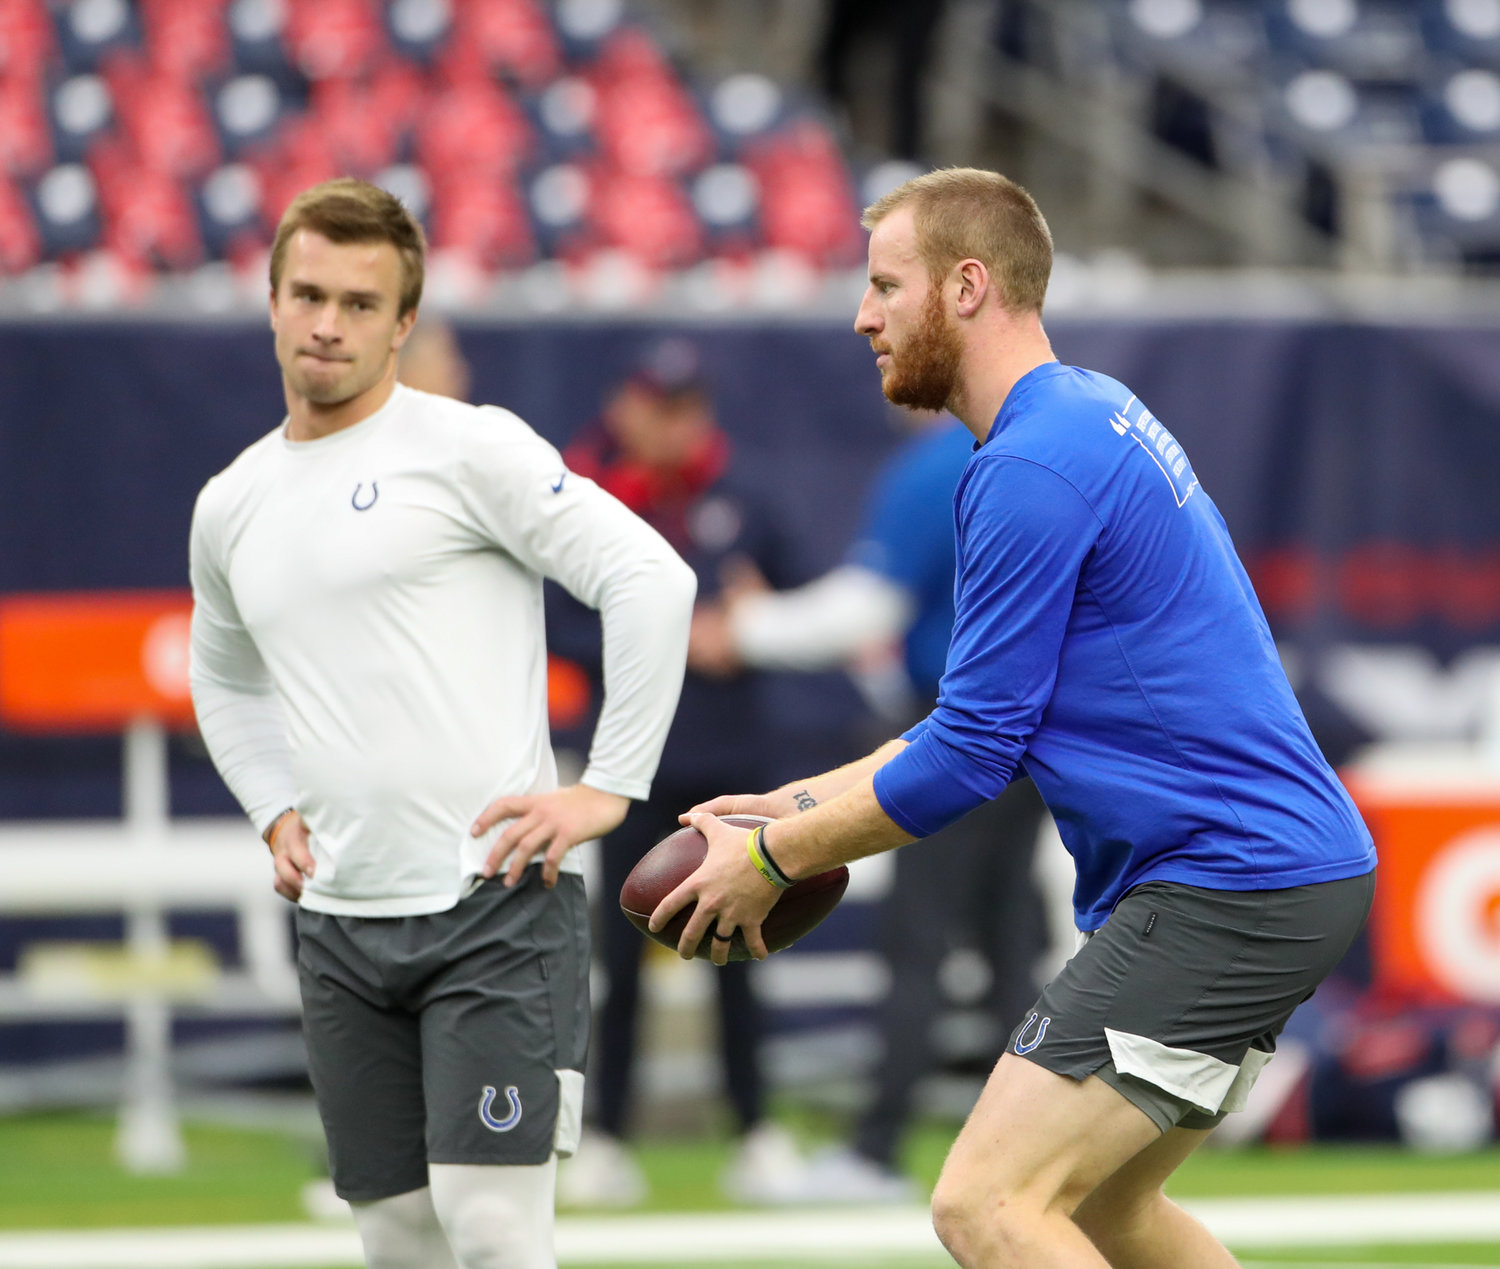 Indianapolis Colts and former Texas Longhorn and Westlake Chaparral quarterback Sam Ehlinger (4) watches as quarterback Carson Wentz (2) warms up before an NFL game between the Texans and the Colts on December 5, 2021 in Houston, Texas.